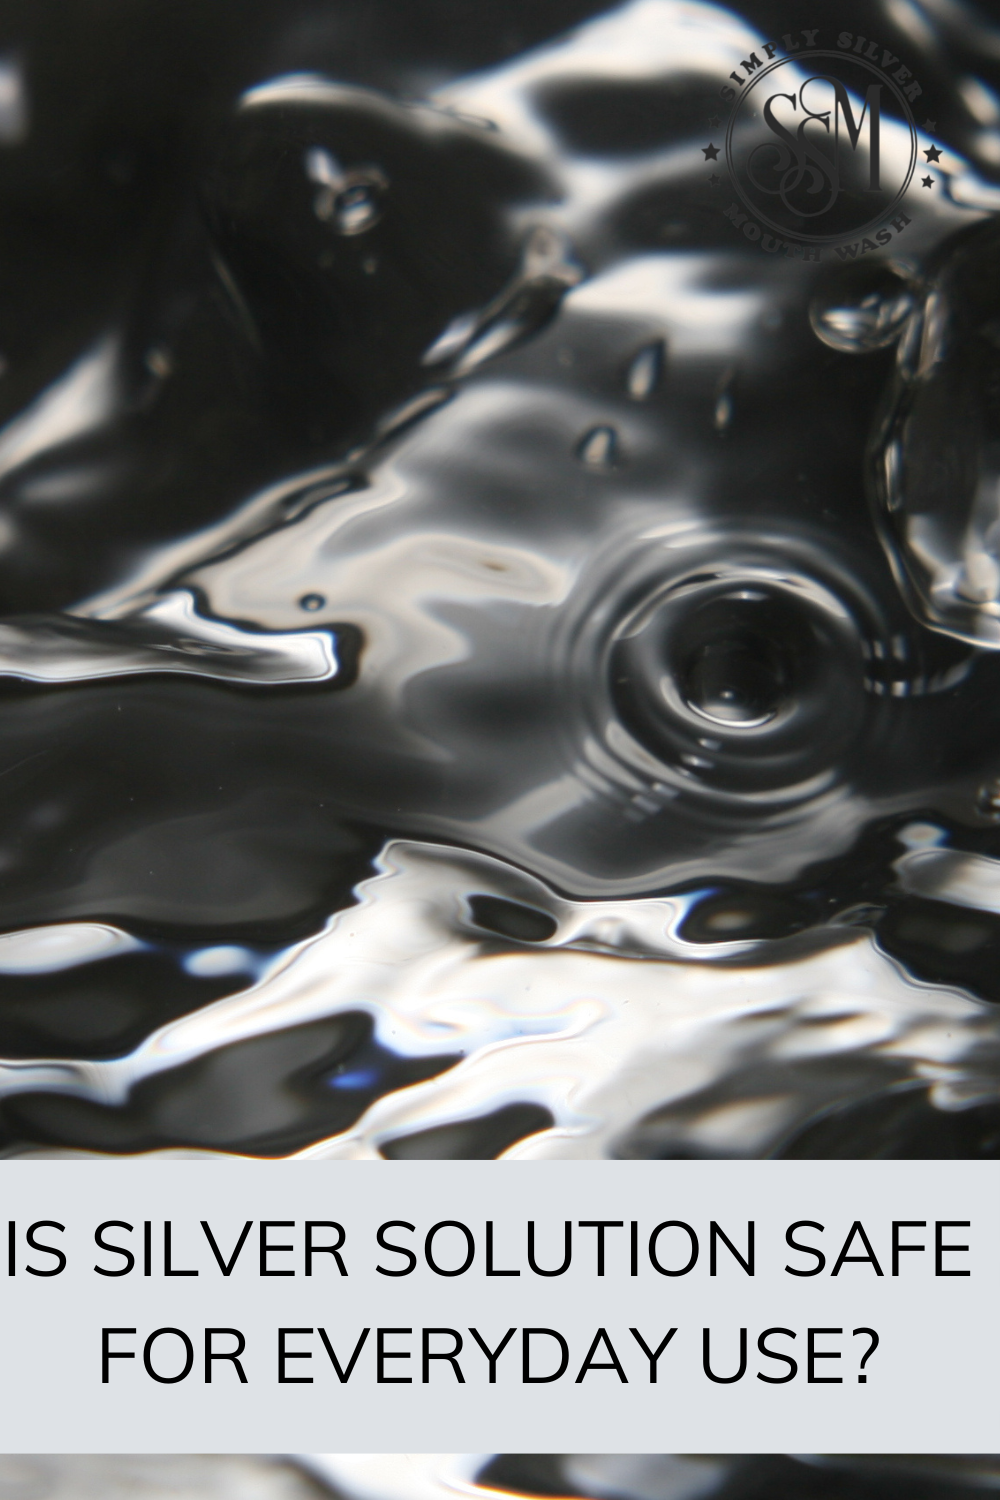 Is Silver Solution safe for everyday use?